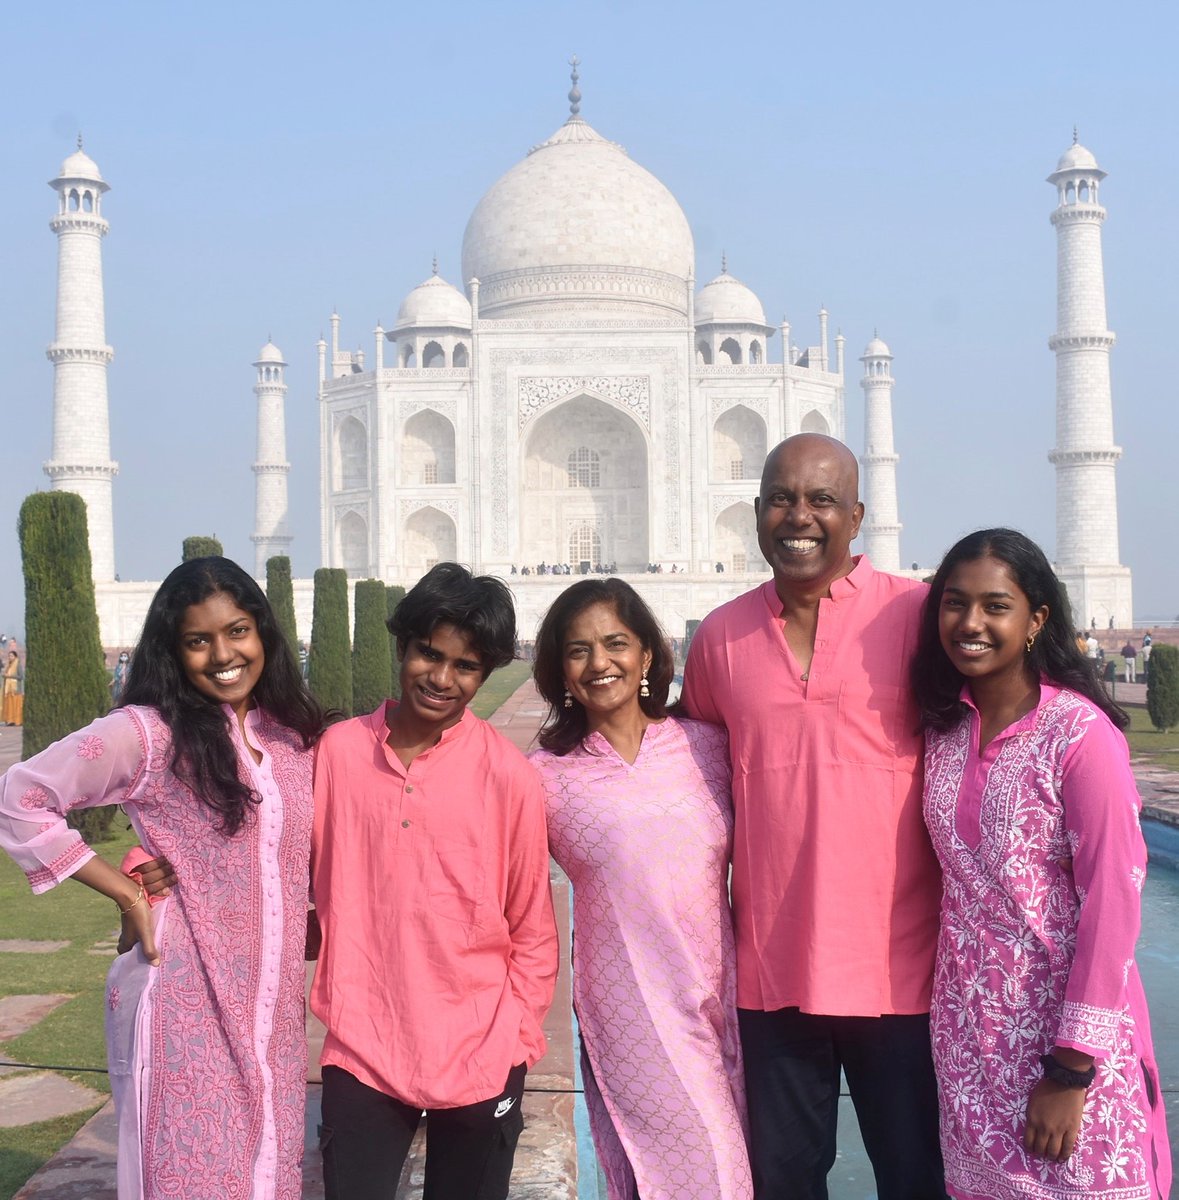 Dr. Latha Palaniappan's professional drive to understand heart disease among Asian American communities stems from a personal loss. 'I am motivated every day by what happened to my father and my family.' Read about her work at spr.ly/6010dMQro #AANHPI #AANHPIHeritageMonth